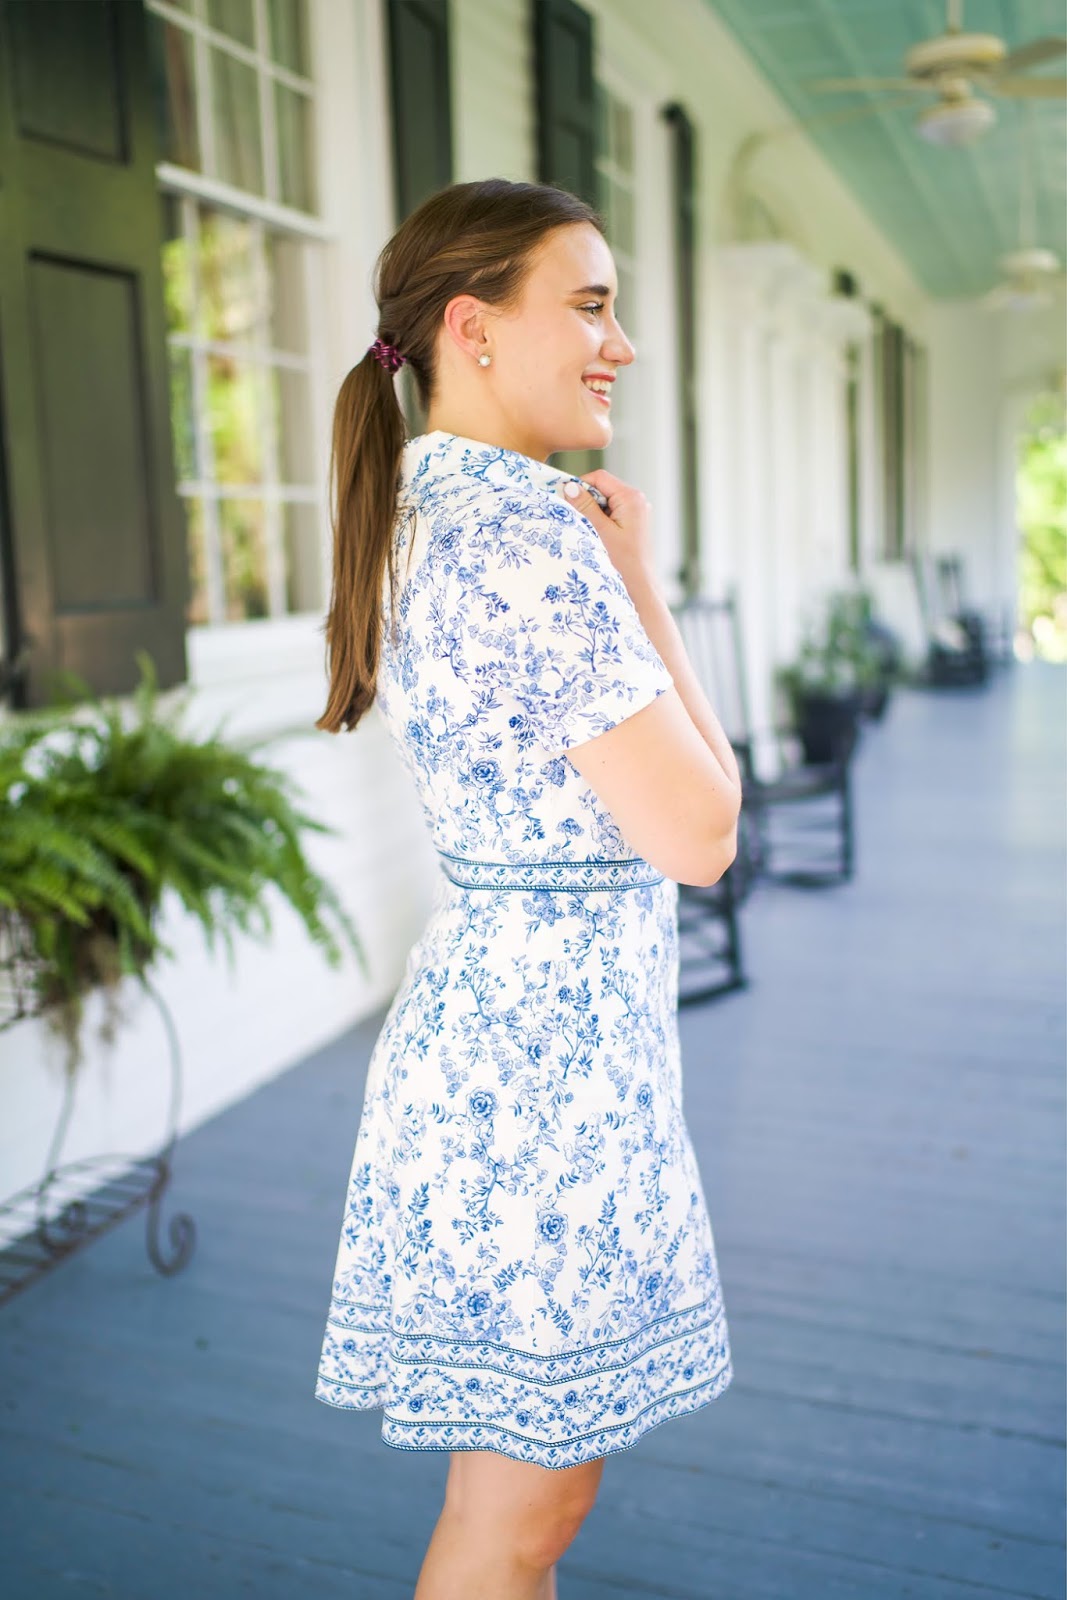 Toile floral shirt dress styled by popular New York fashion blogger Covering the Bases